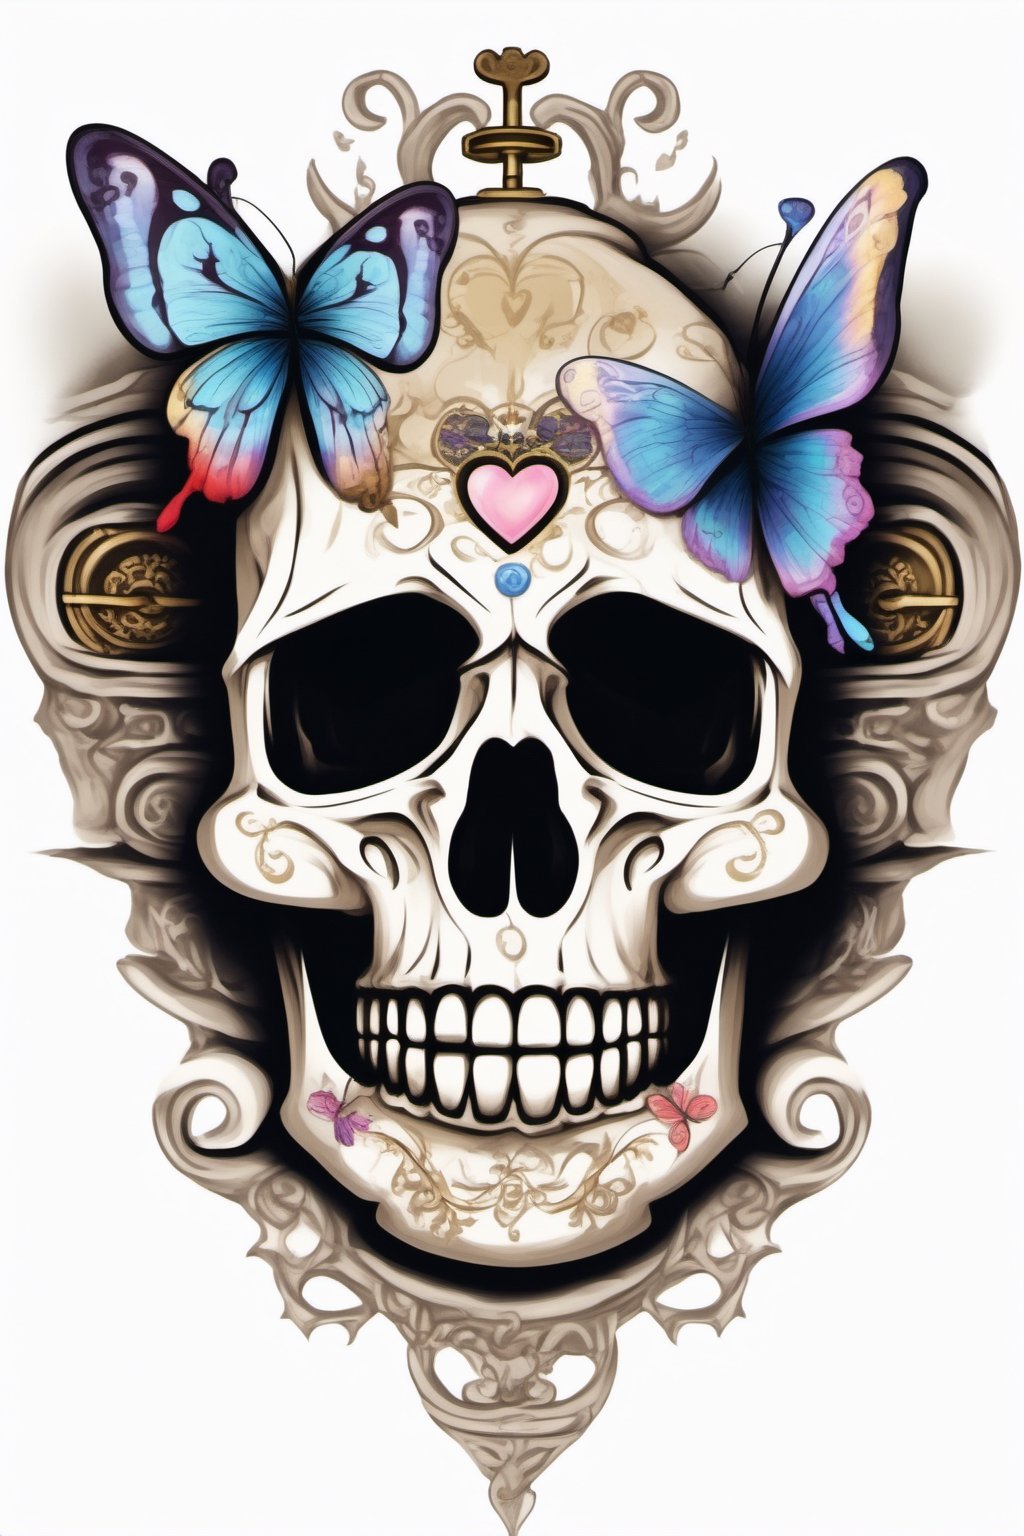 large intricate skull with butterfly wings colorful heart shaped lock with skeleton key inscribed with the date 02-22-2022 and the name behind two happily married very old people with the names jacob and irene